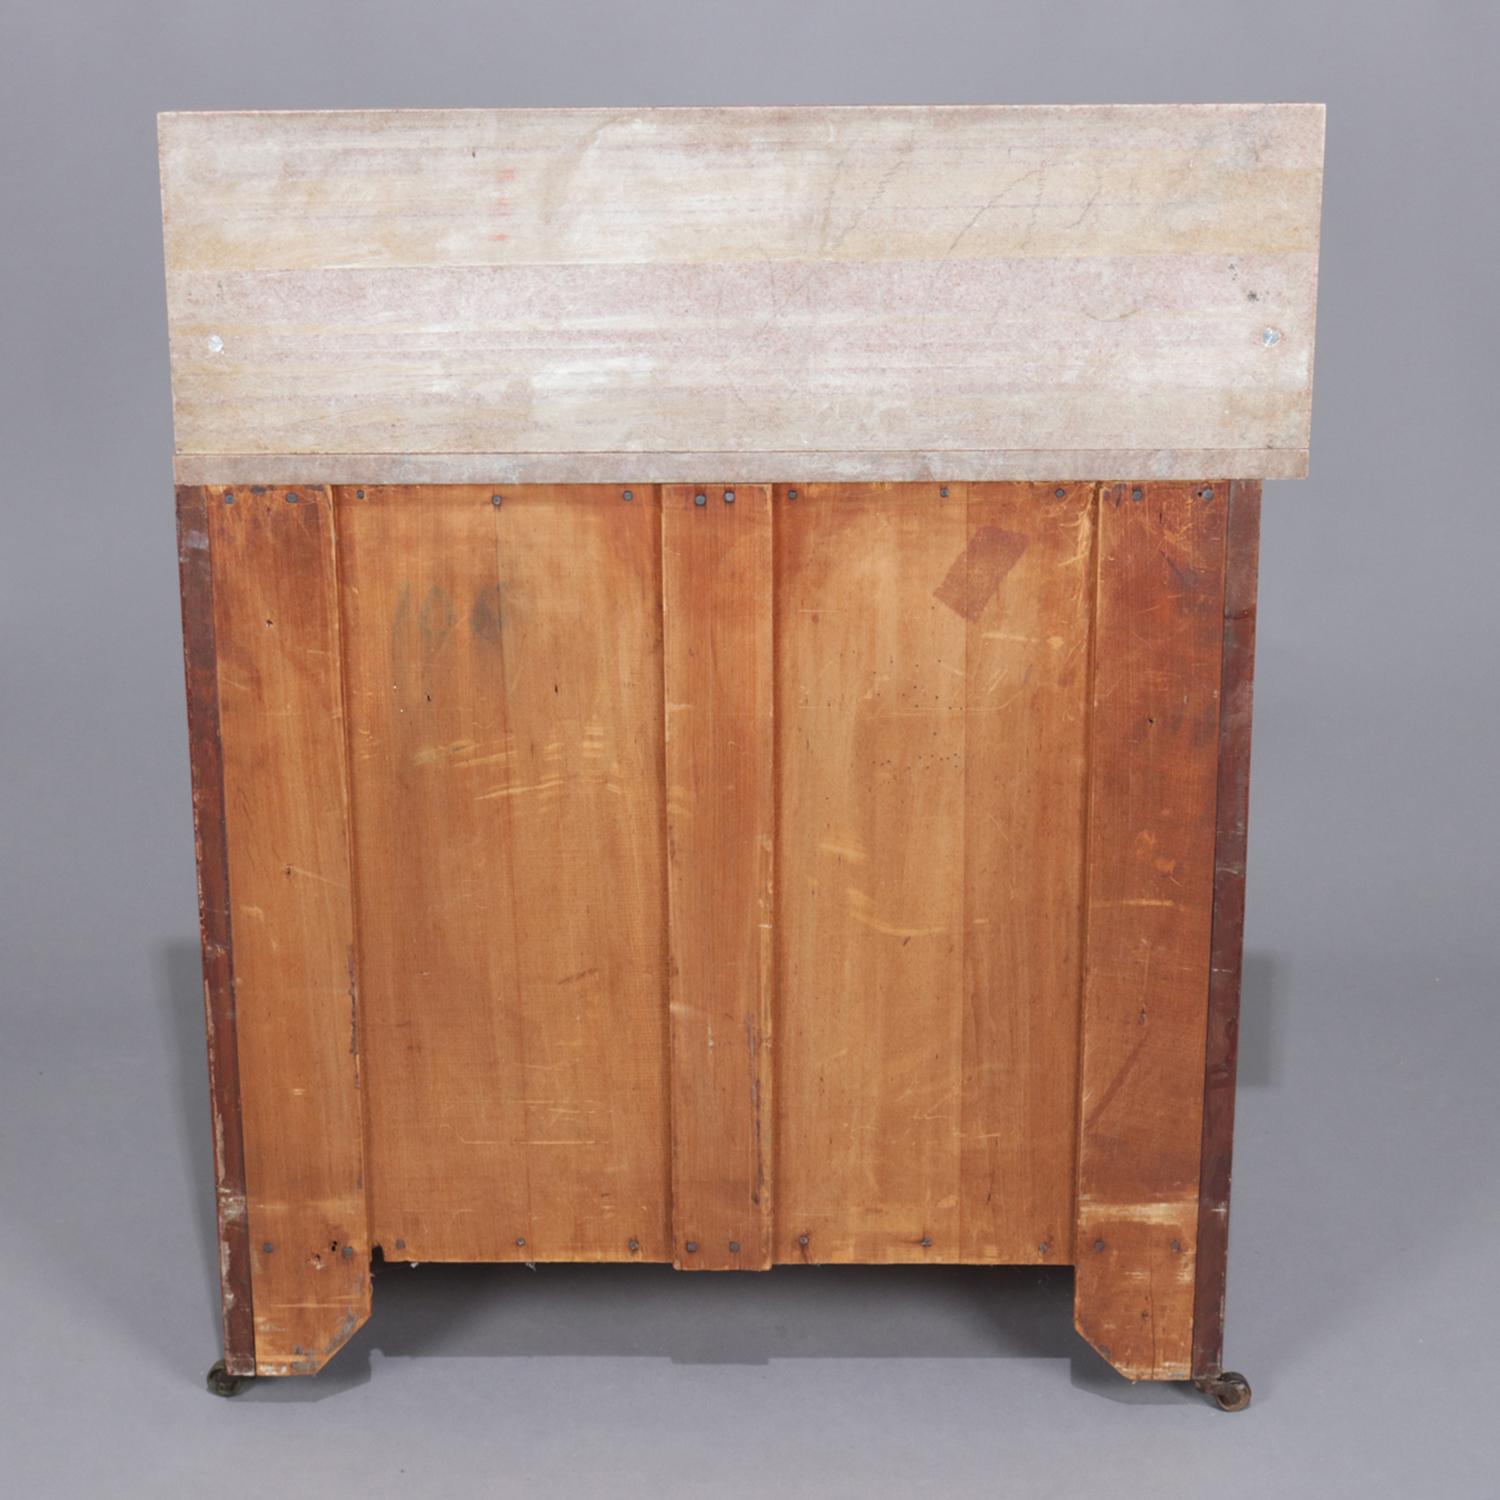 American Antique Victorian Marble-Top and Two-Toned Walnut Wash Stand, circa 1890